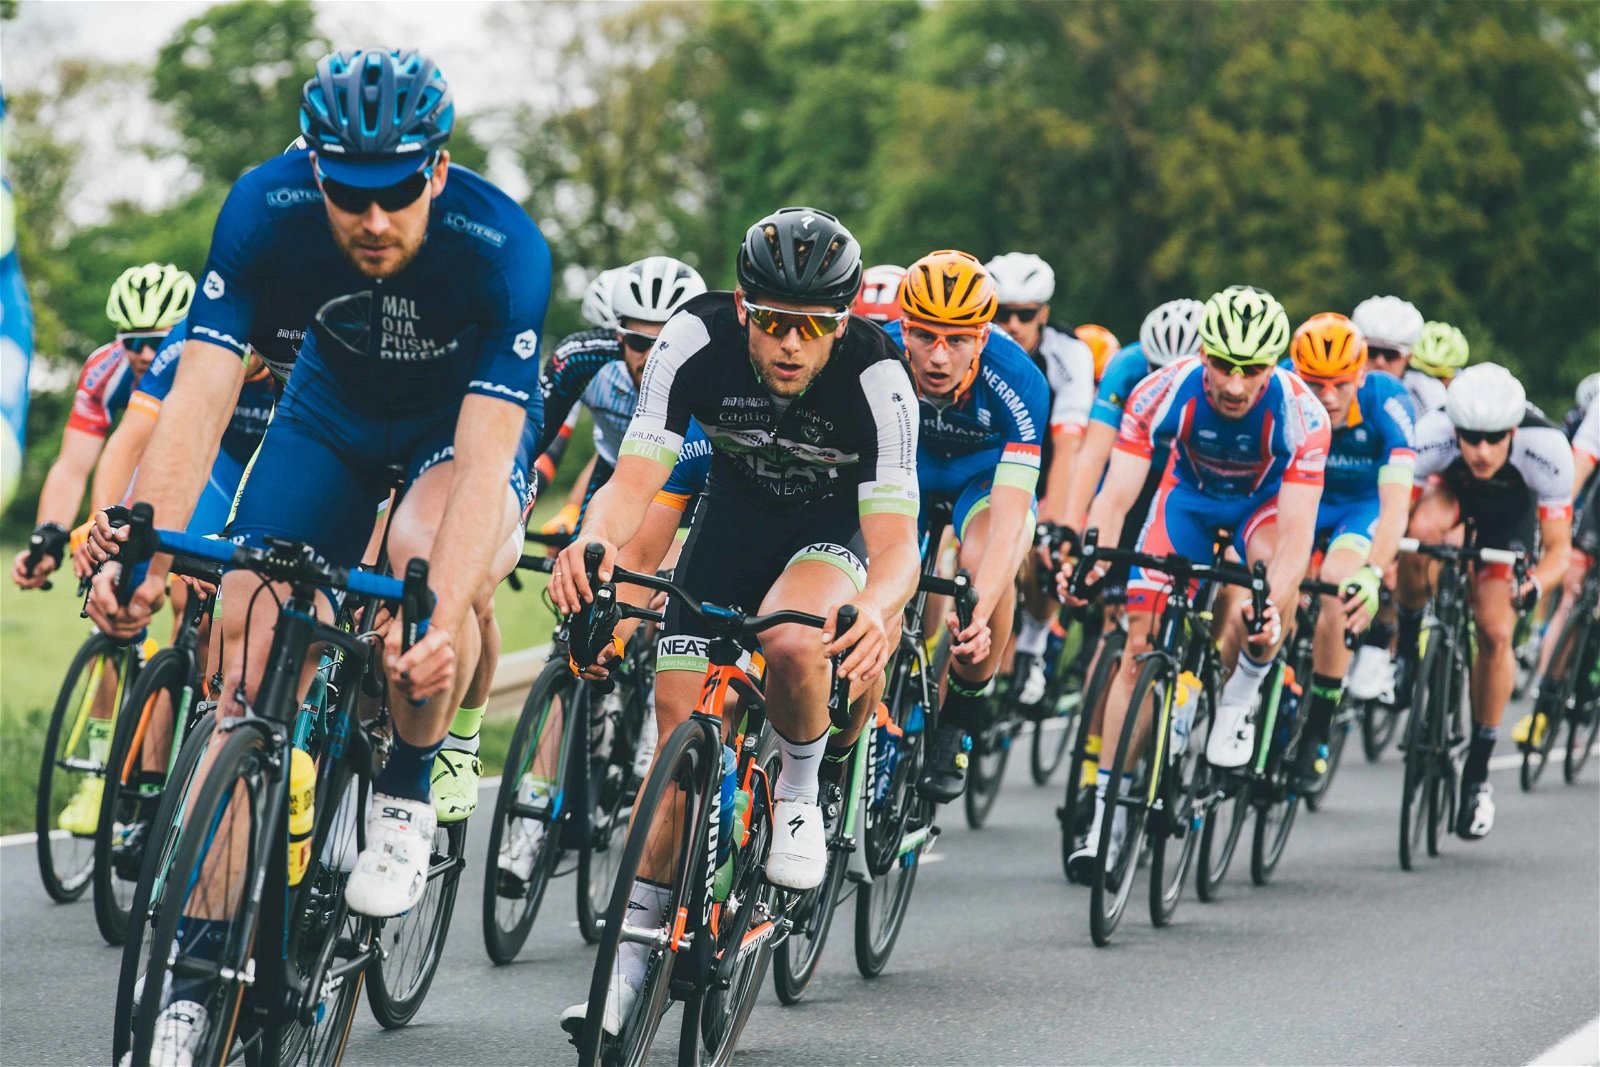 Knowing the sport you want to photograph can help you position yourself to get the images you envision, such as this photograph of a bicycle race.